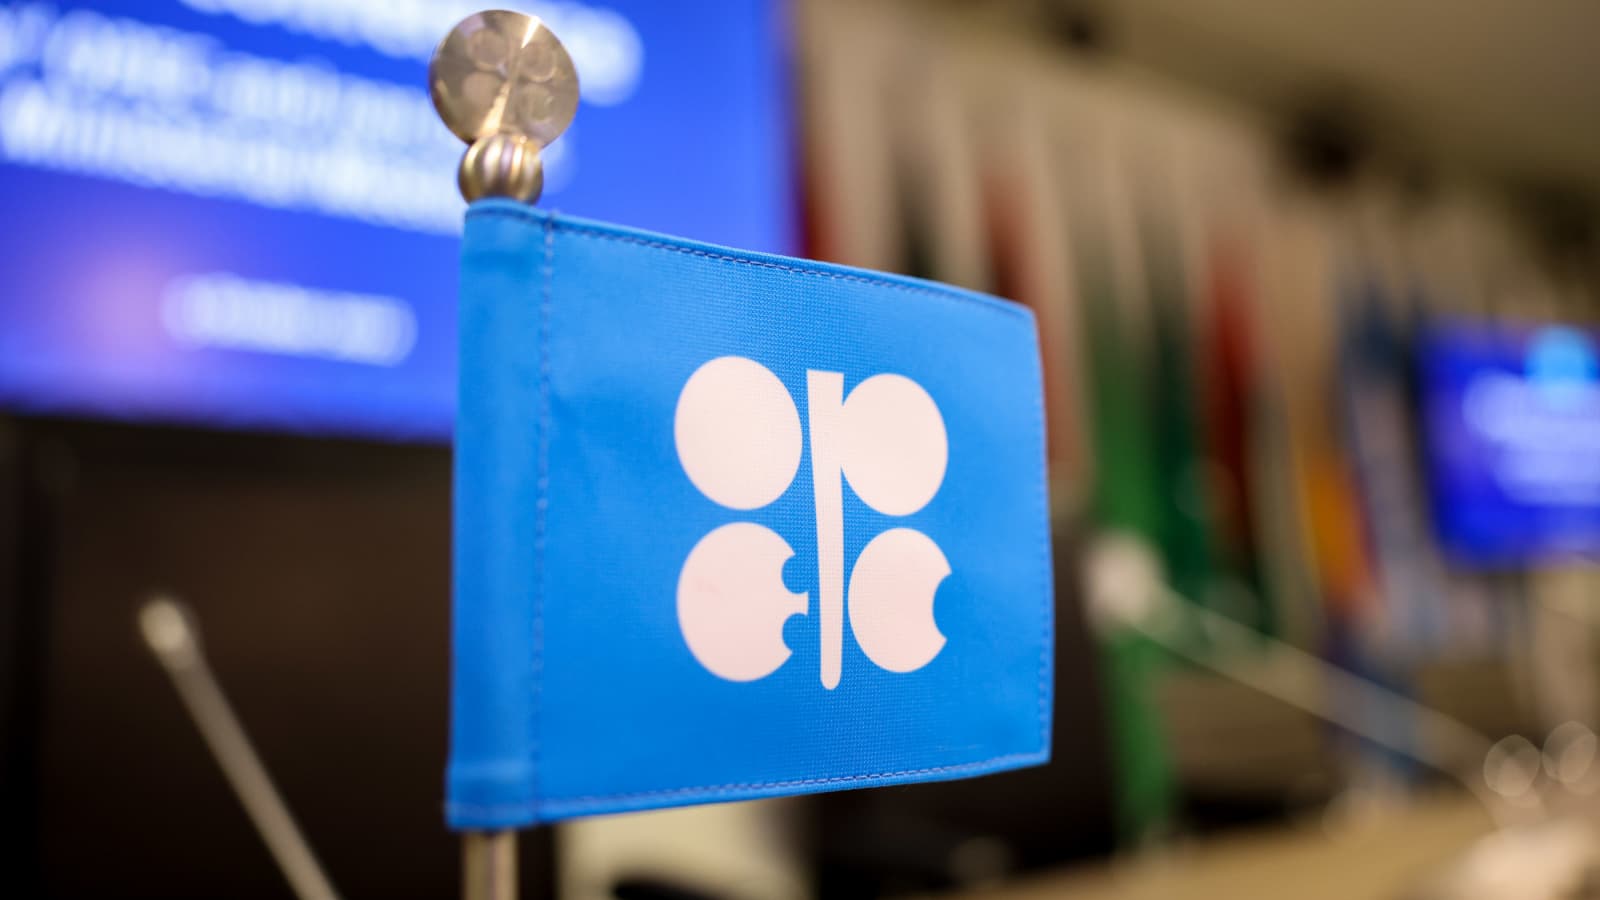 OPEC+ agrees deep cuts to oil production despite US pressure